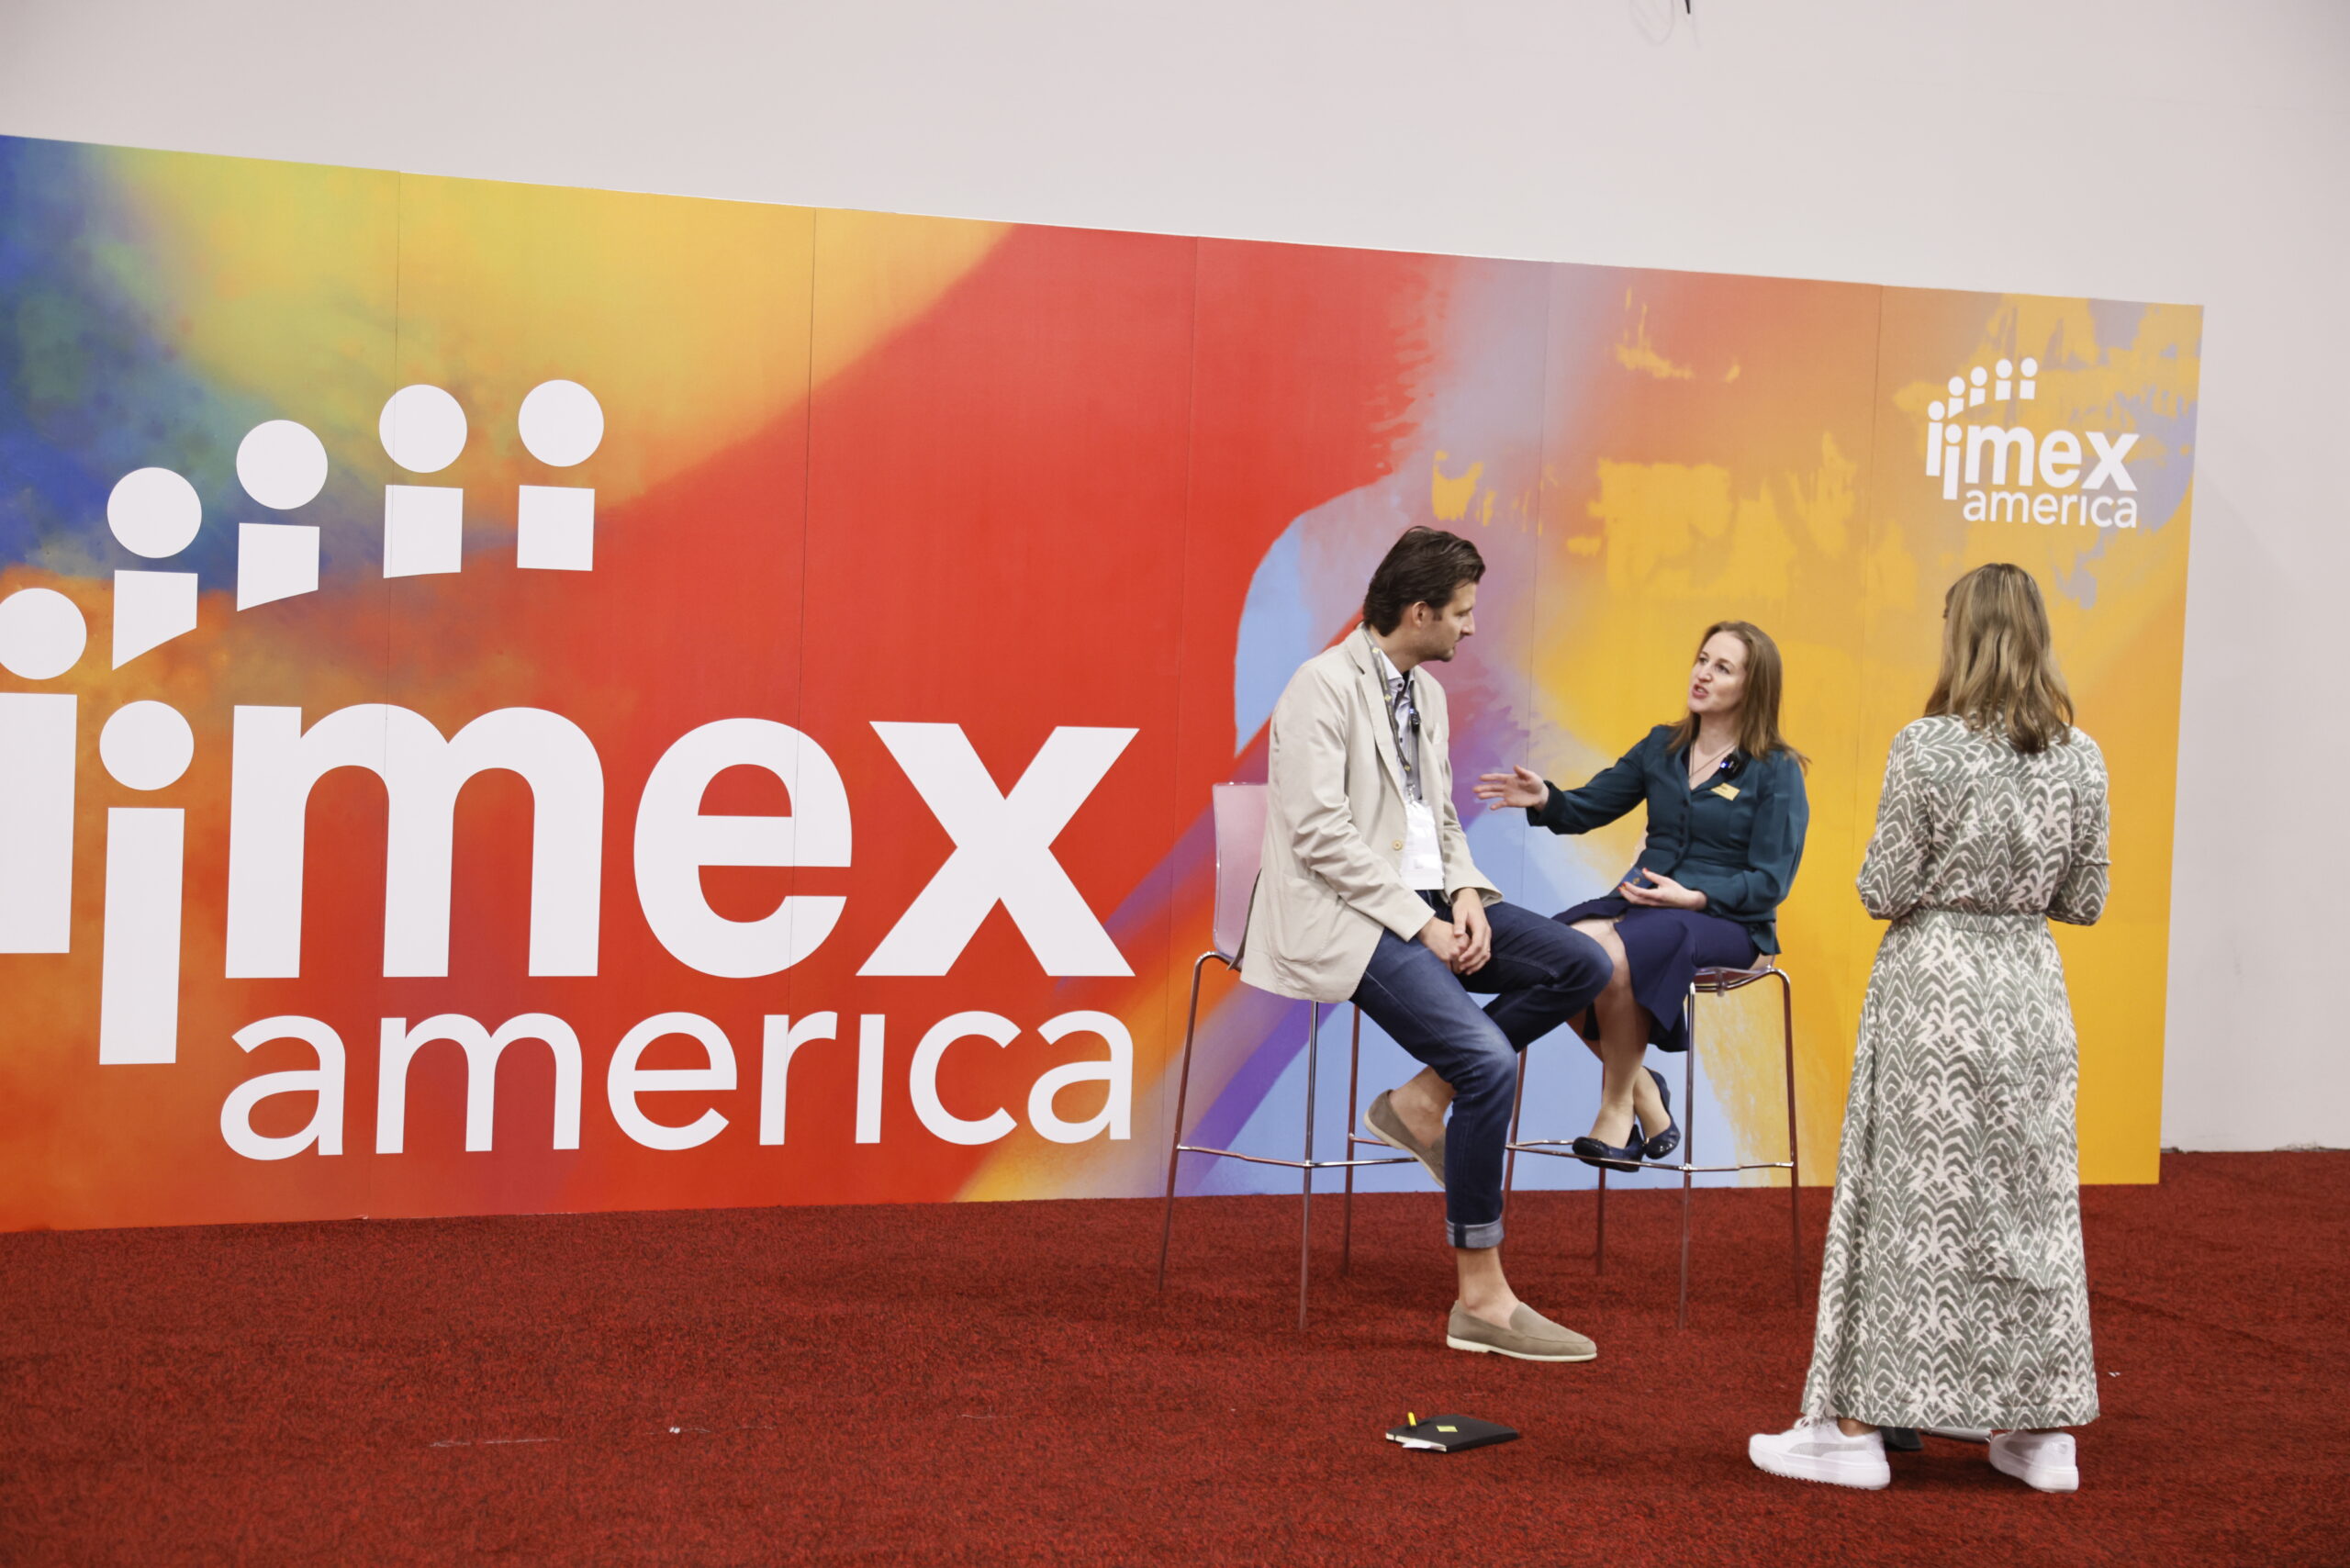 imex ceo carina bauer talking with someone at imex event